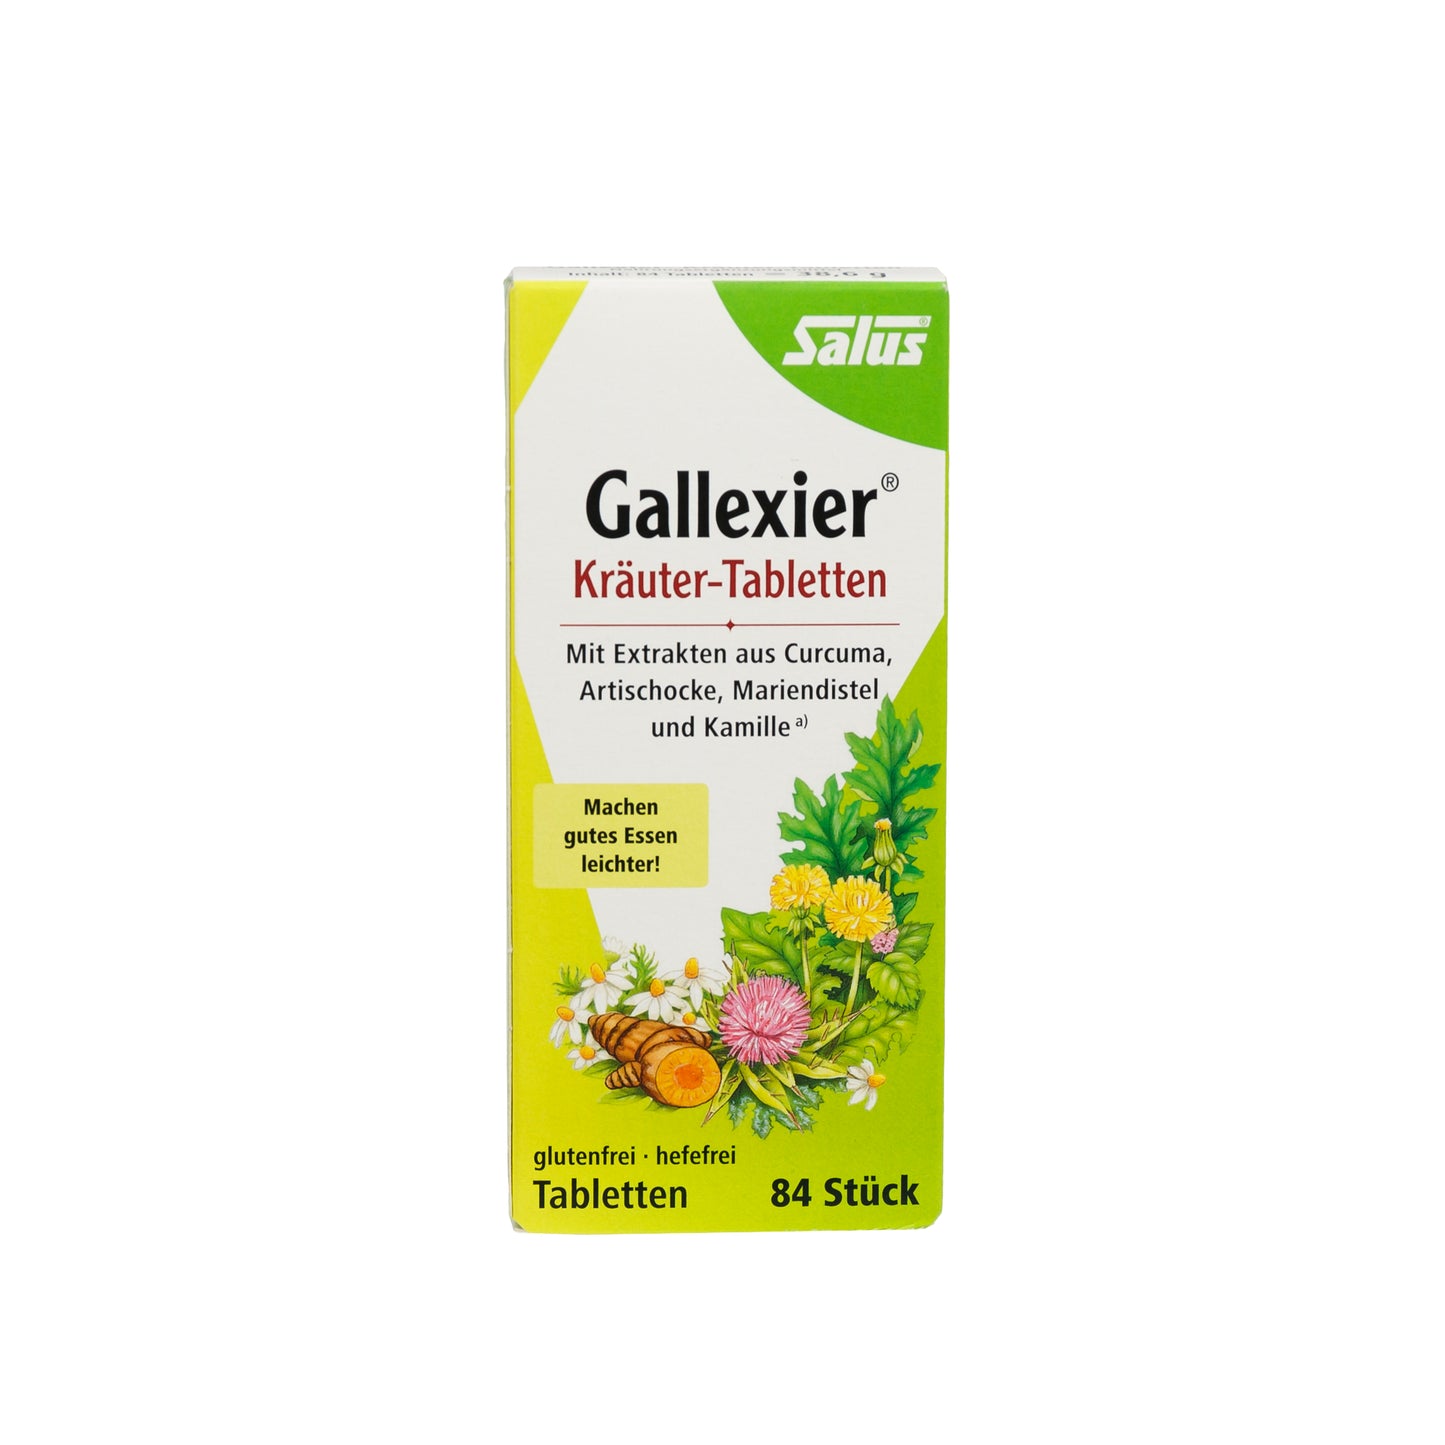 Primary Image of Gallexier Tablets